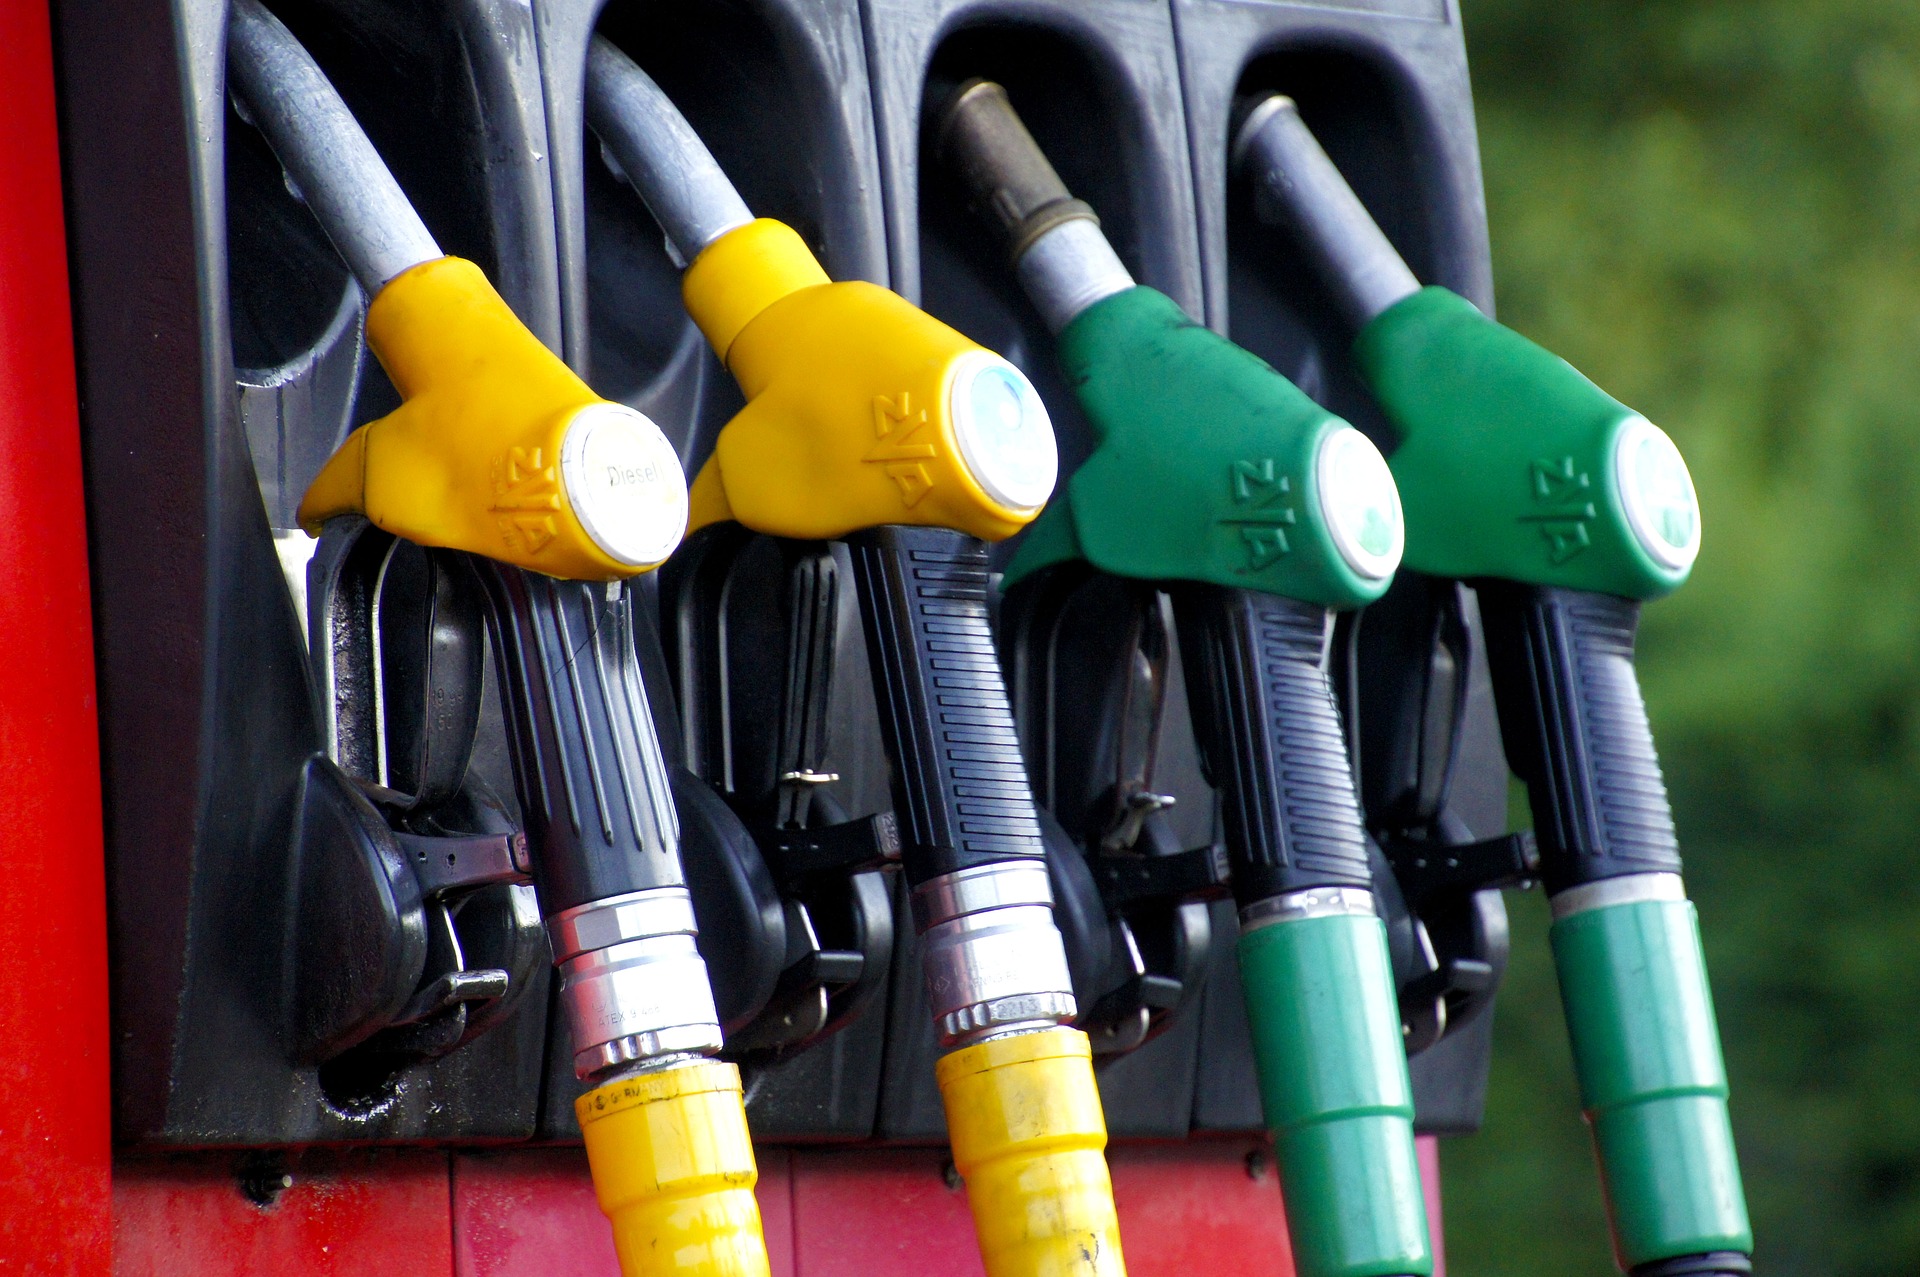 Fuel levy likely to see large increase